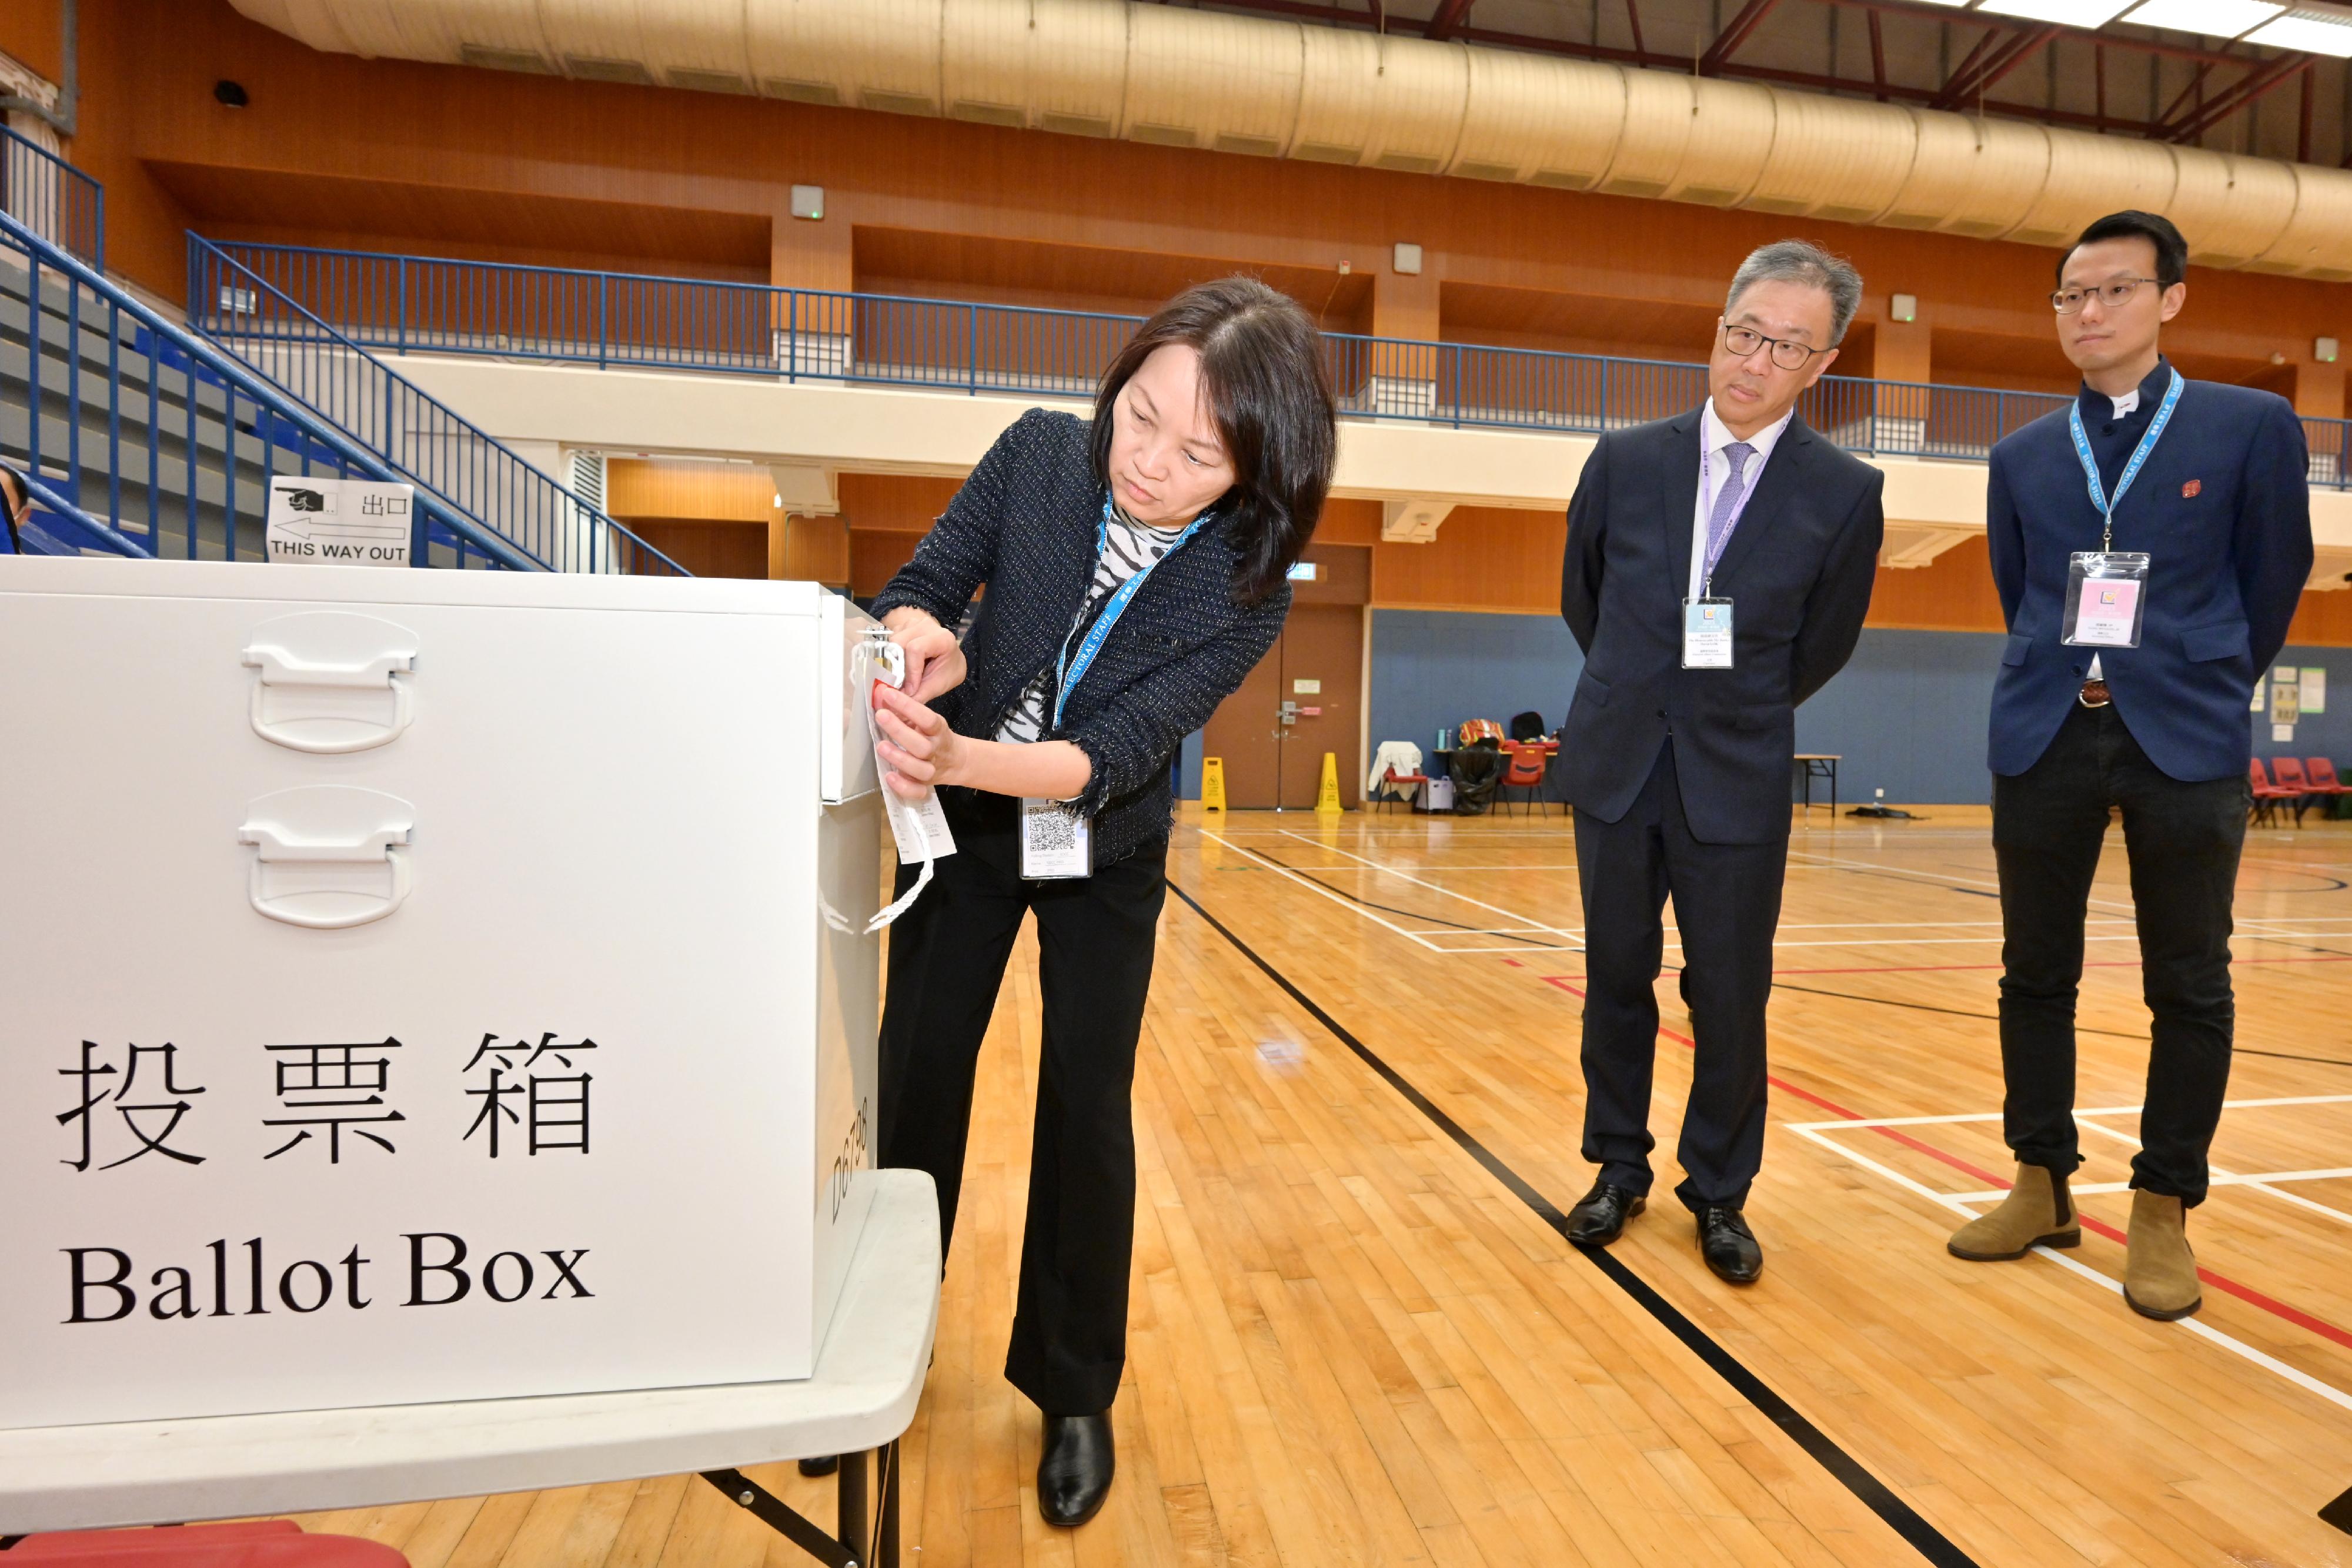 The Chairman of the Electoral Affairs Commission, Mr Justice David Lok (centre), visits the District Committees constituency polling station of the 2023 District Council Ordinary Election at Osman Ramju Sadick Memorial Sports Centre this afternoon (December 10) to inspect the presiding officer locking and sealing the ballot box.